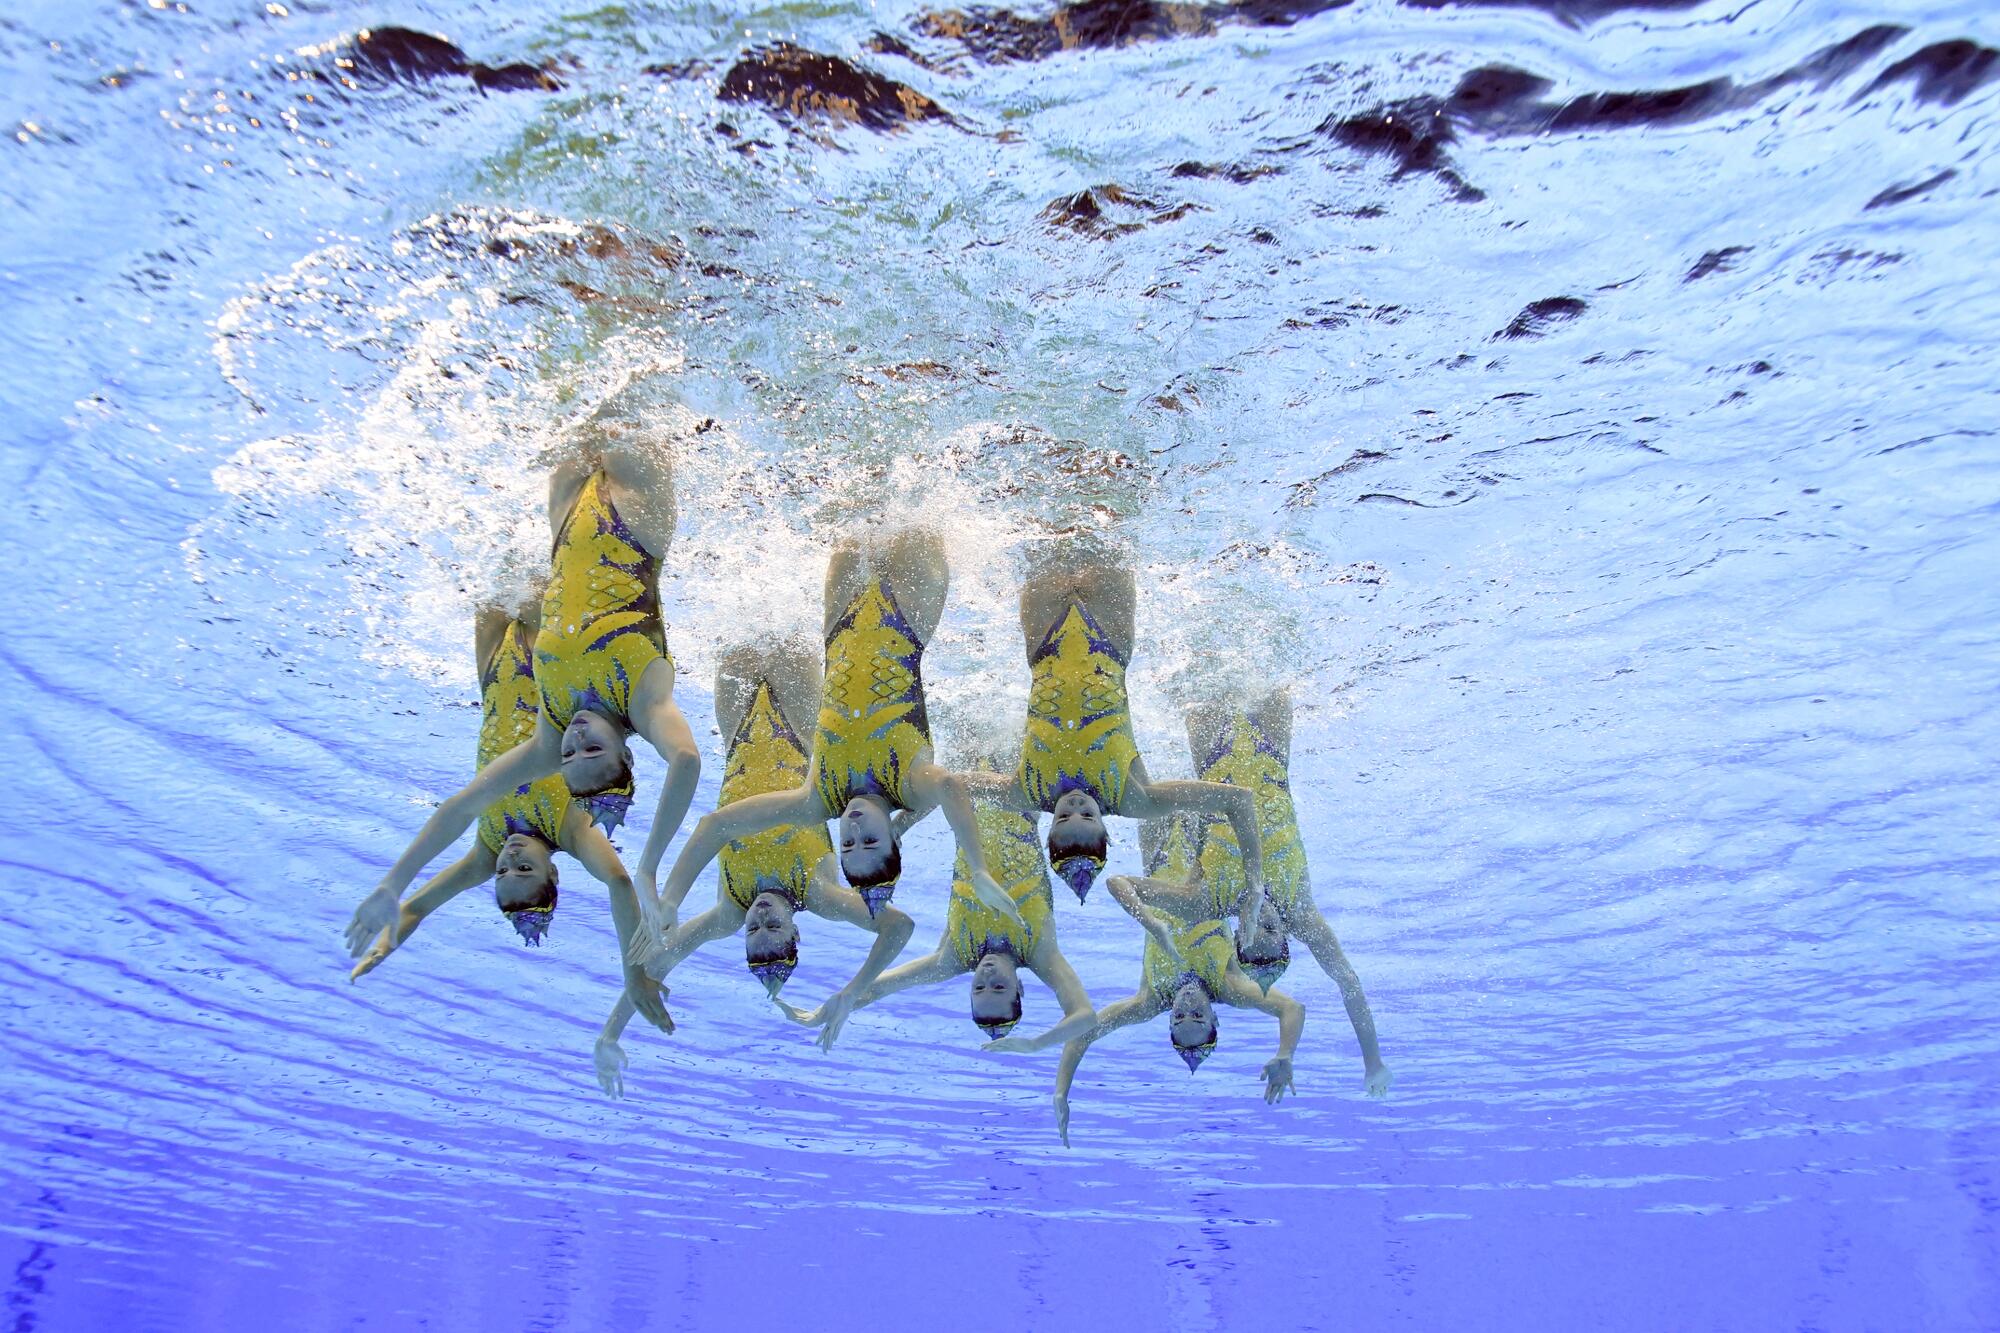 The Spain artistic swimming team hangs upside down in the water with their legs above the surface